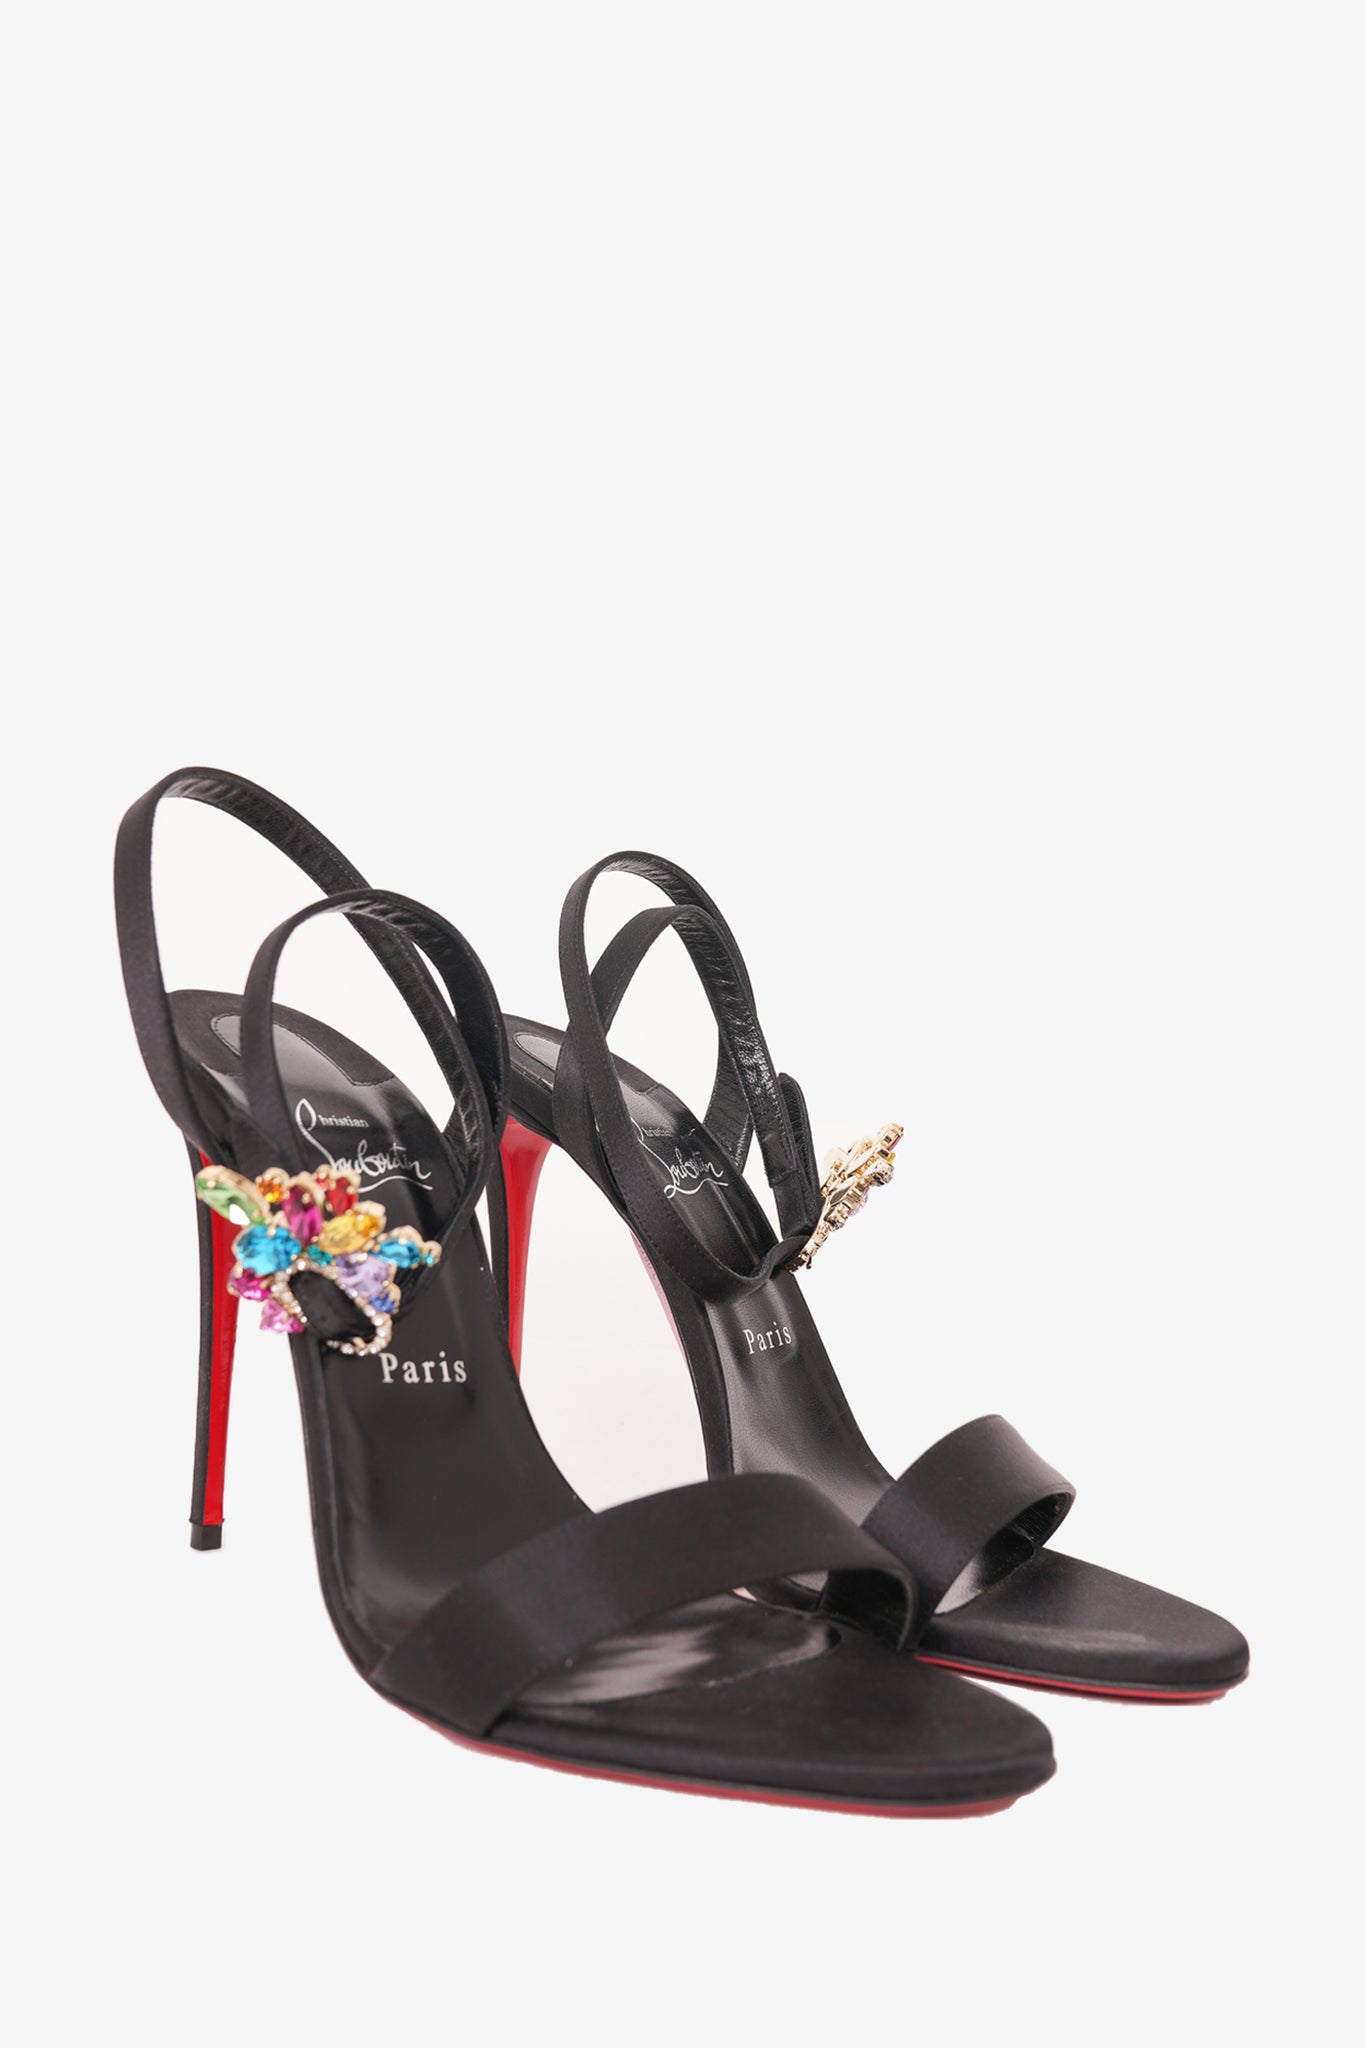 Yours, Mine, And Ours Dramione.  Louis vuitton shoes heels, Louis  vuitton red bottoms, Christian louboutin shoes